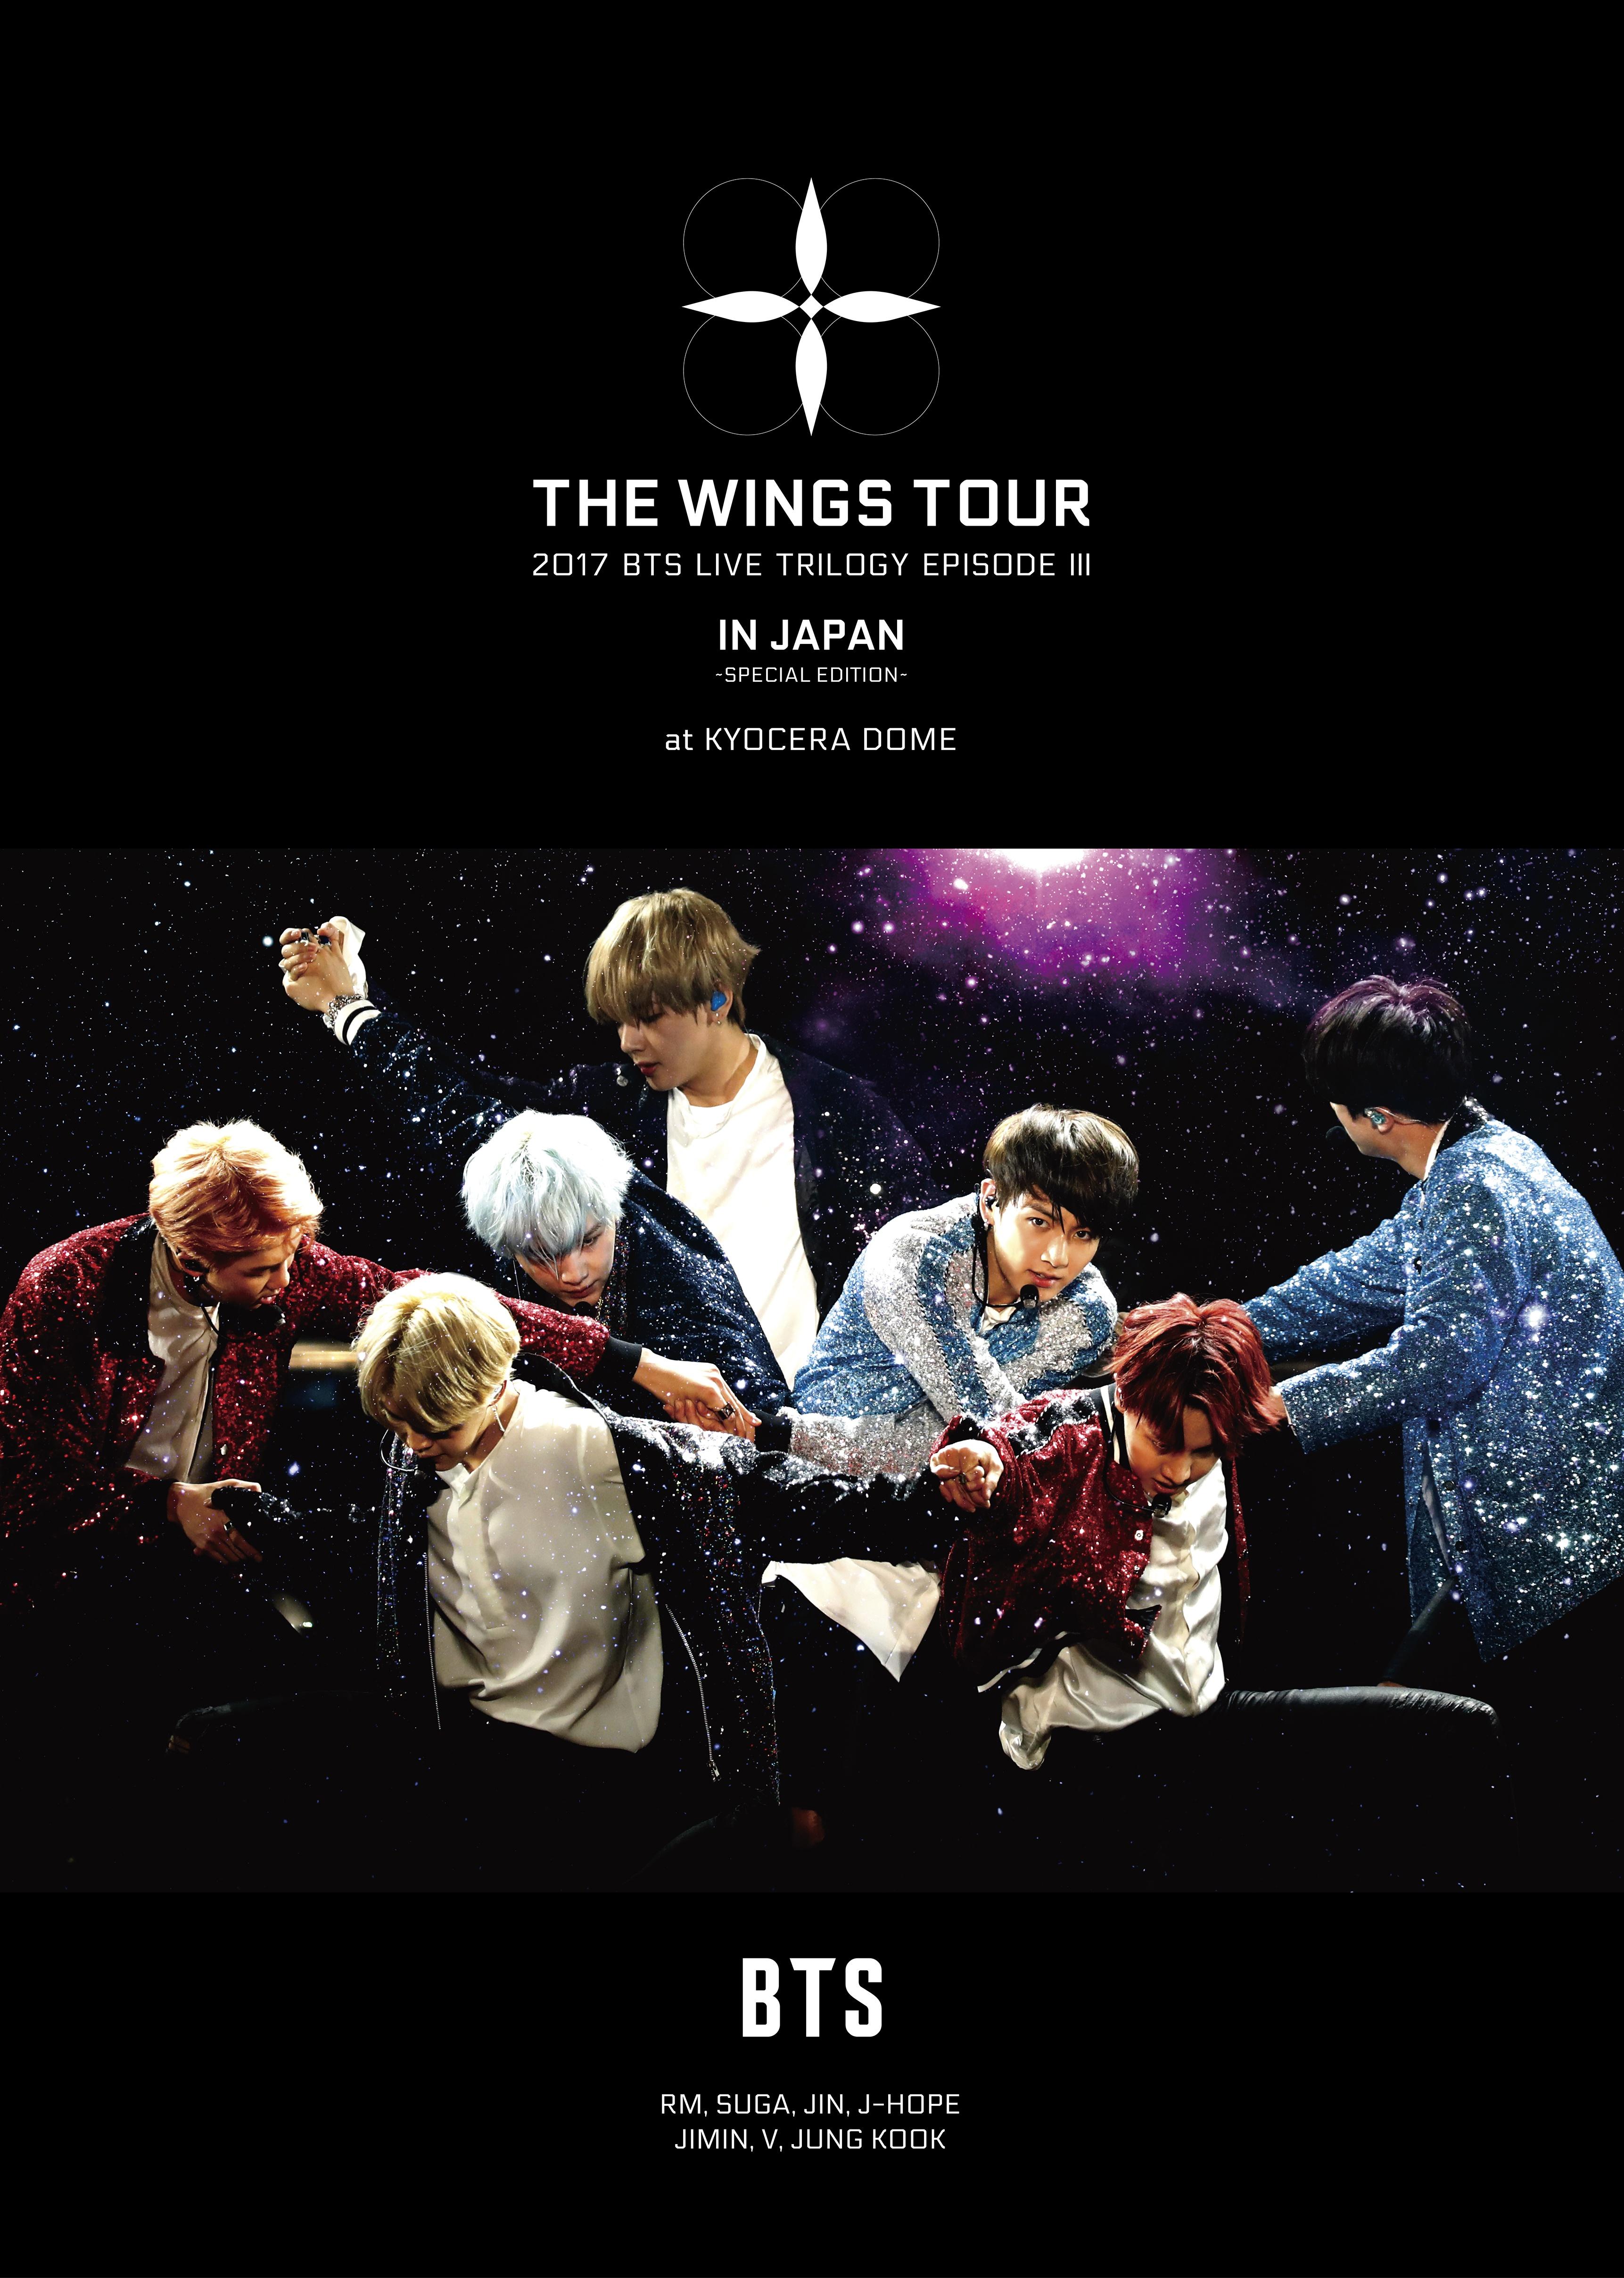 Info] 2017 BTS LIVE TRILOGY EPISODE III THE WINGS TOUR IN JAPAN 